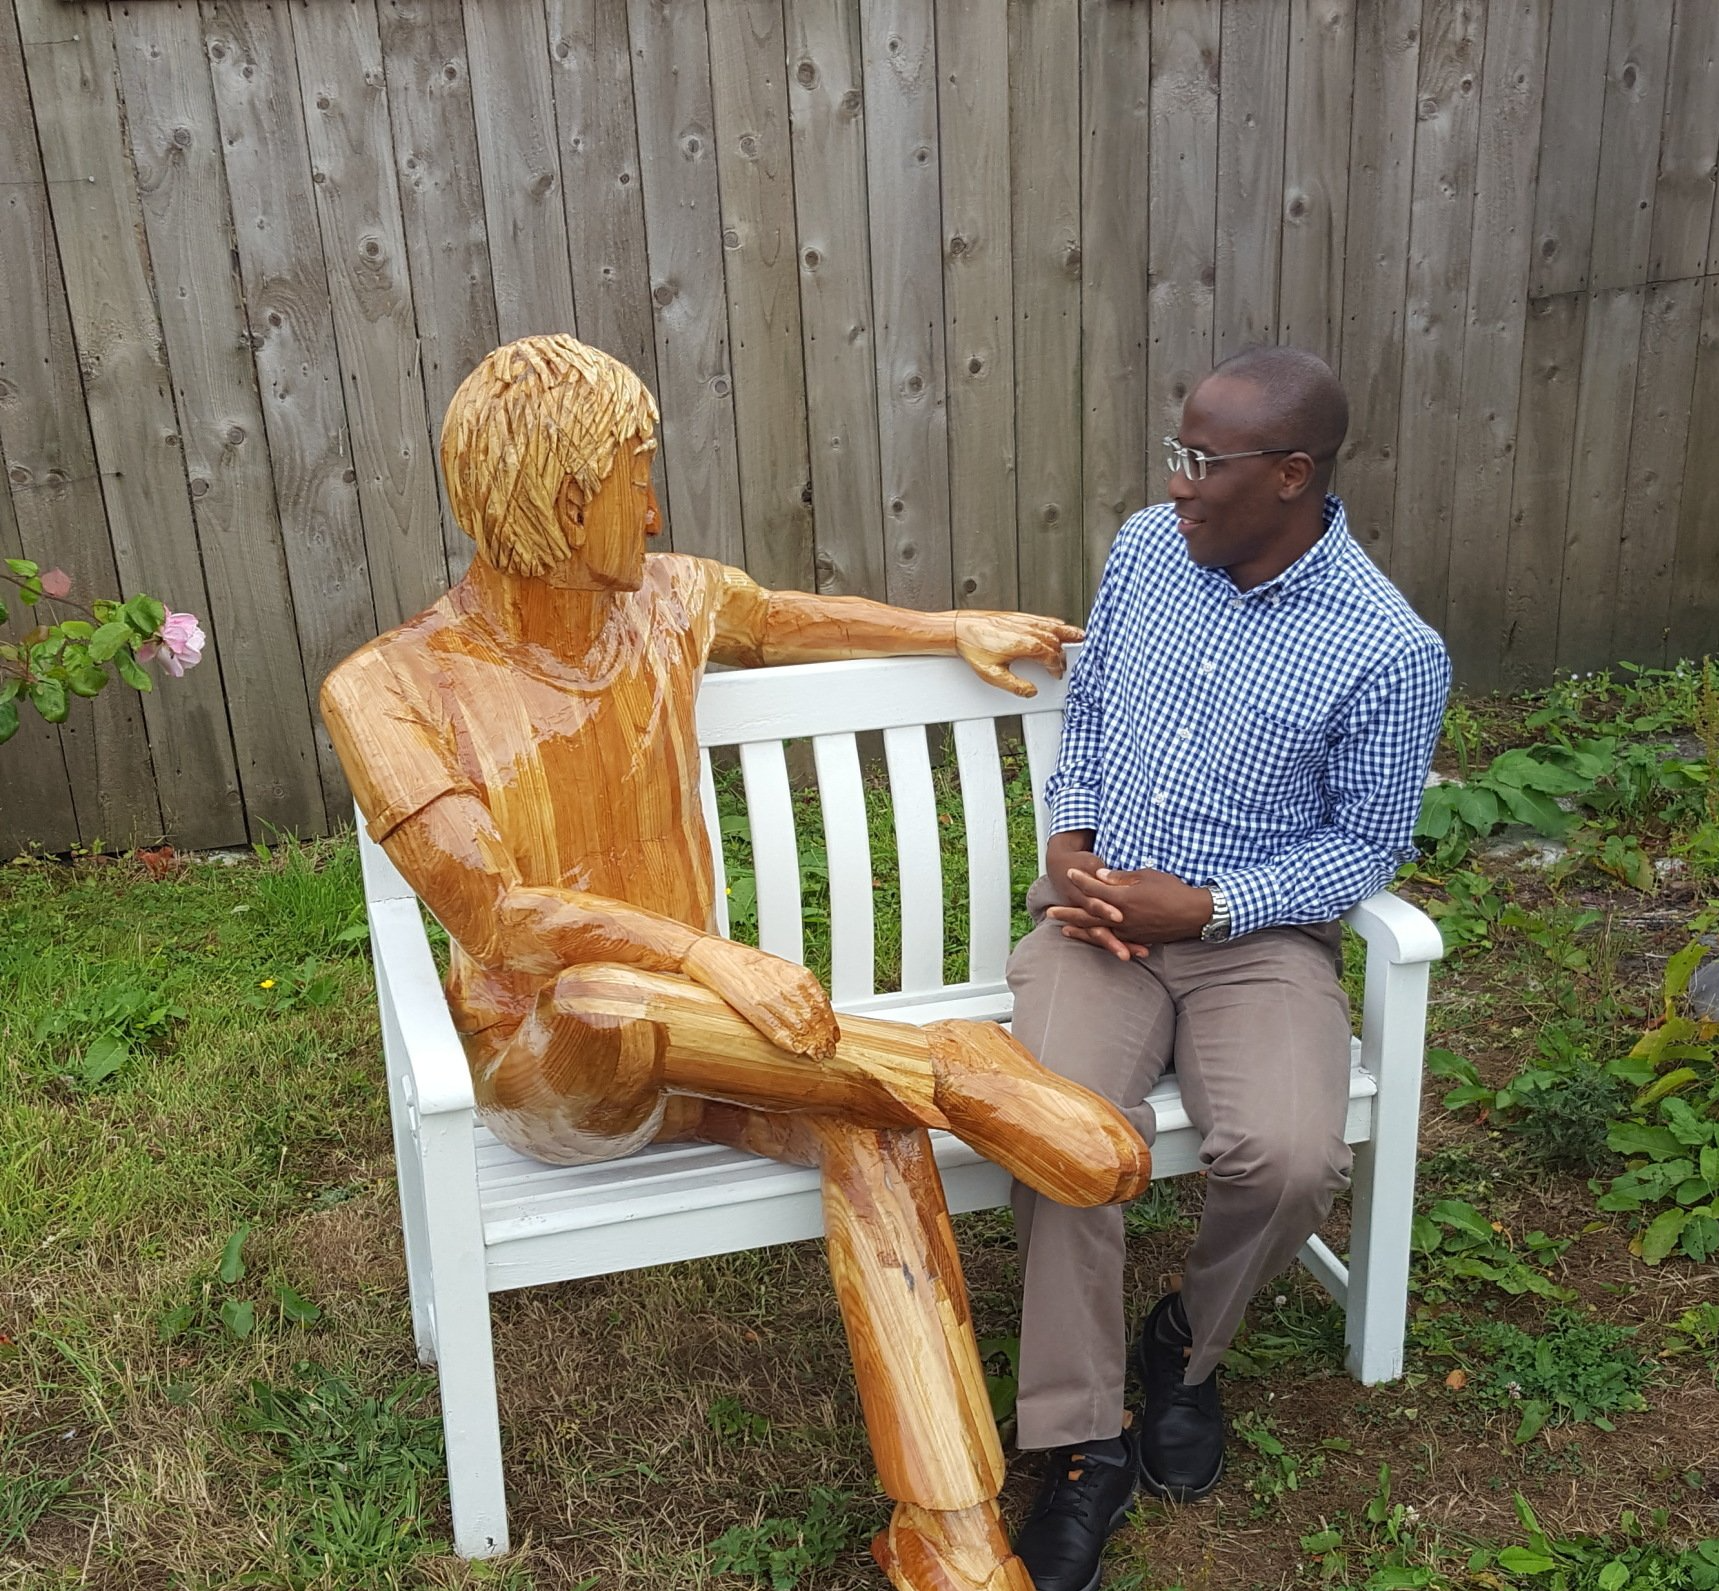 A wooden sculpture in use for therapy. made by Ingrained Culture